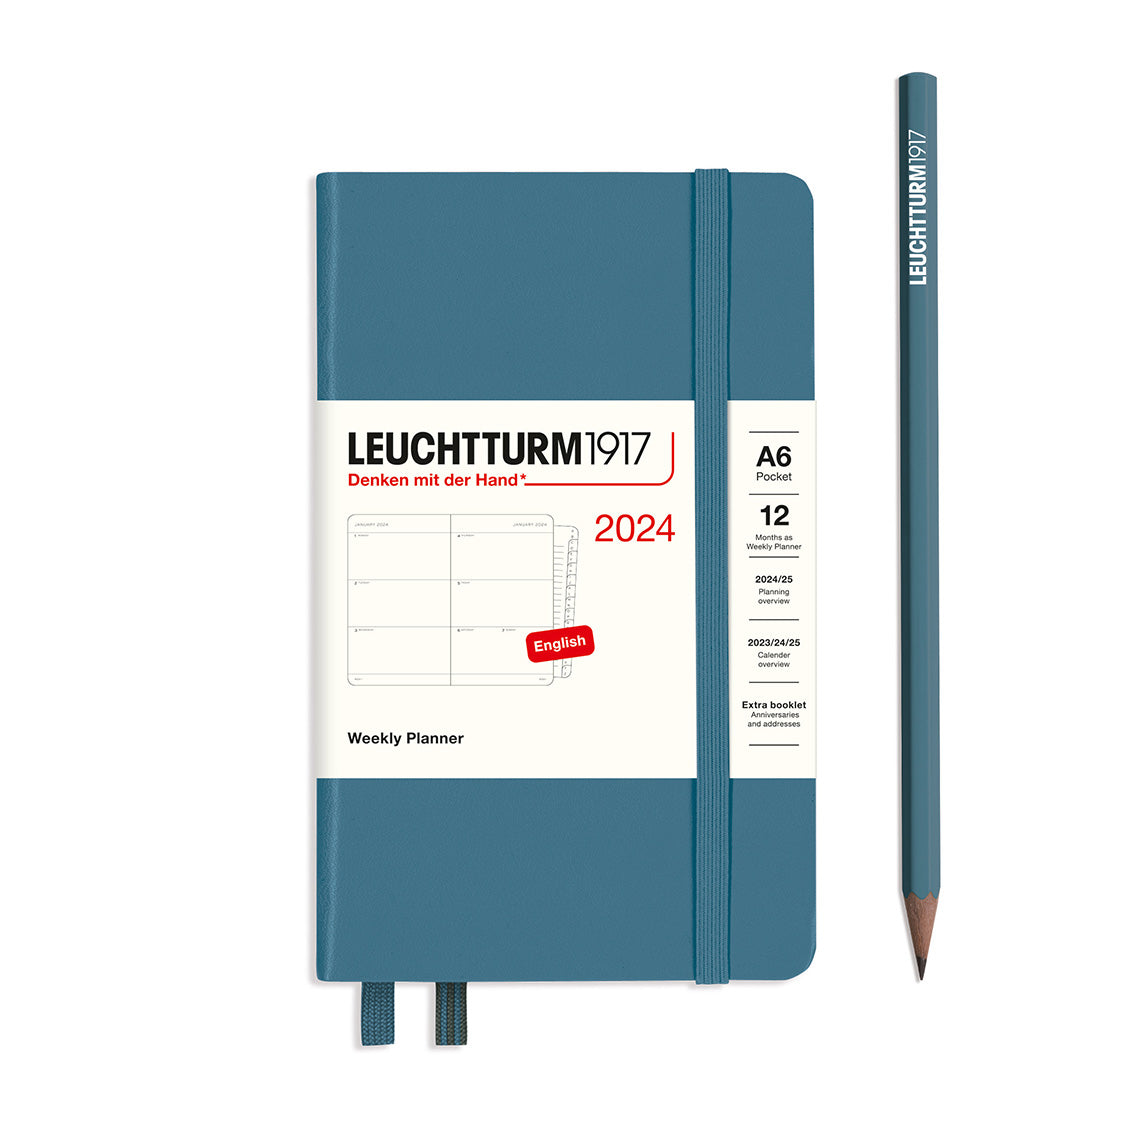 An image of a blue planner with a blue elastic band holding it together and a cream paper wrap around the middle stating the business name Leuchtturm1917, that it is for the year 2024, it is a weekly planner, is A6 in size and an English language version. It has an image on the wrap showing the inside layout which is a week spread across 2 pages. A blue pencil is shown at the side of the planner.